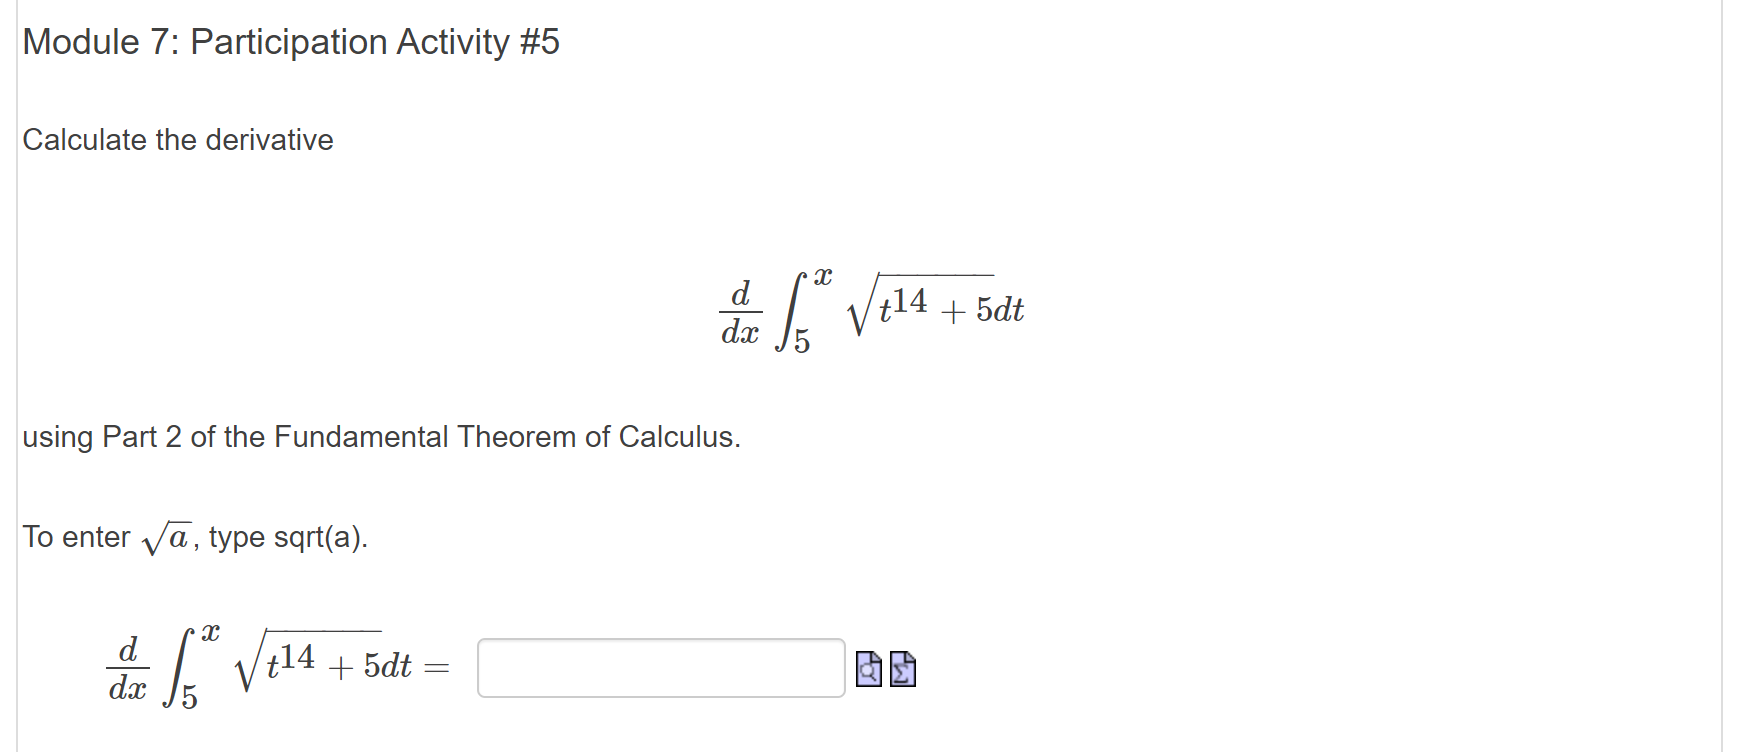 Calculate the derivative
d
dx
t14
+ 5dt
using Part 2 of the Fundamental Theorem of Calculus.
